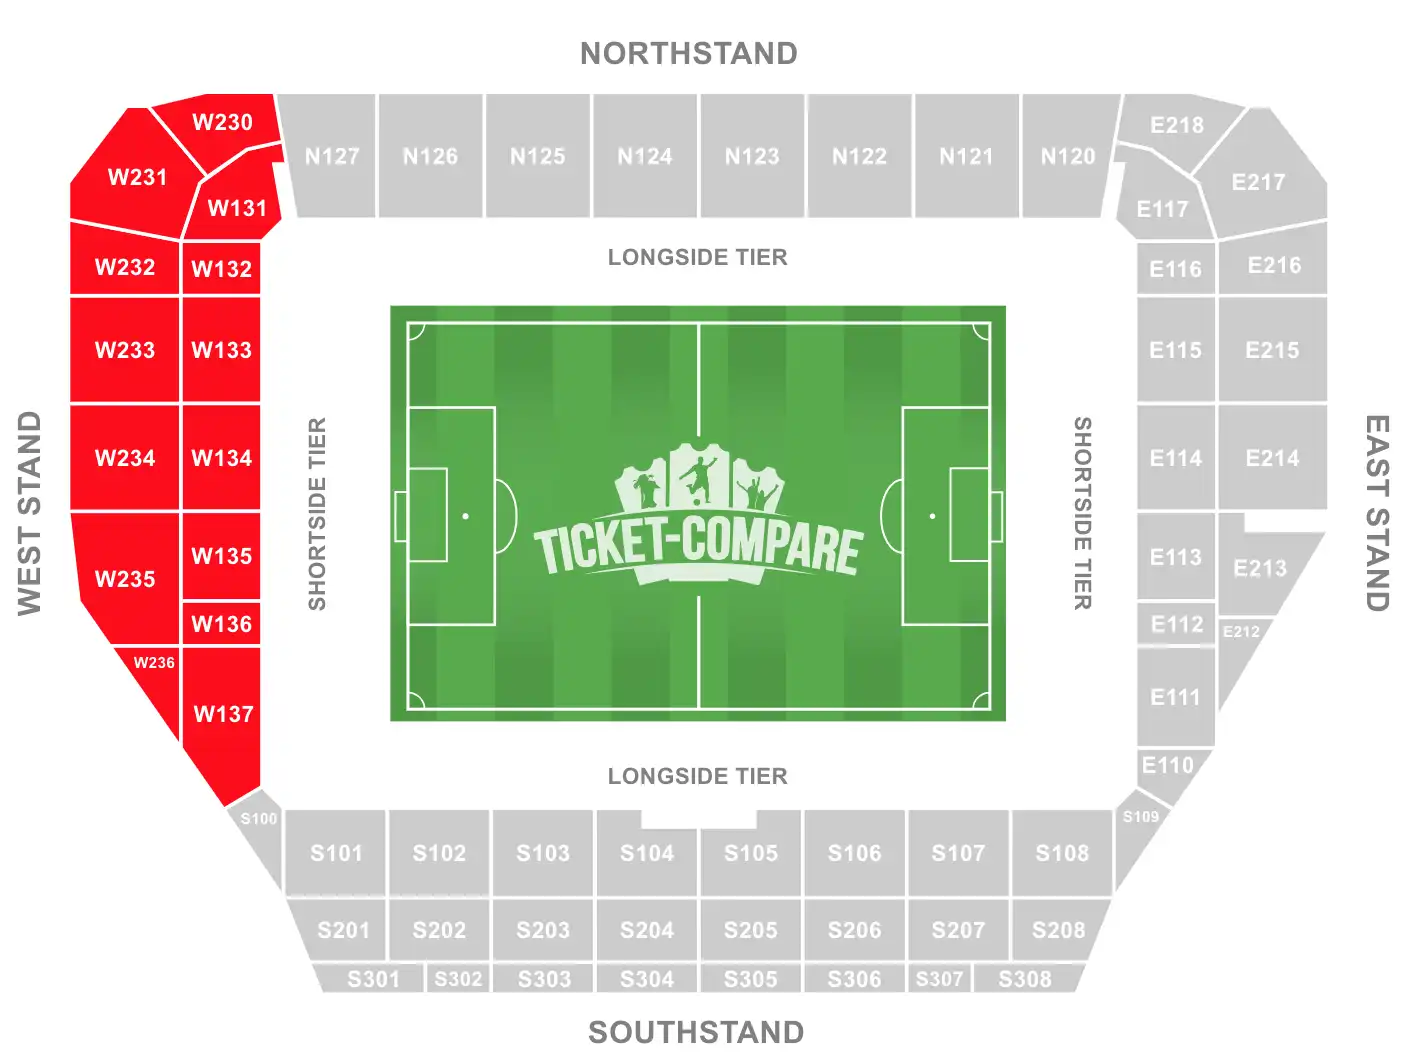 Community Stadium Seating Plan with highligted the West stand